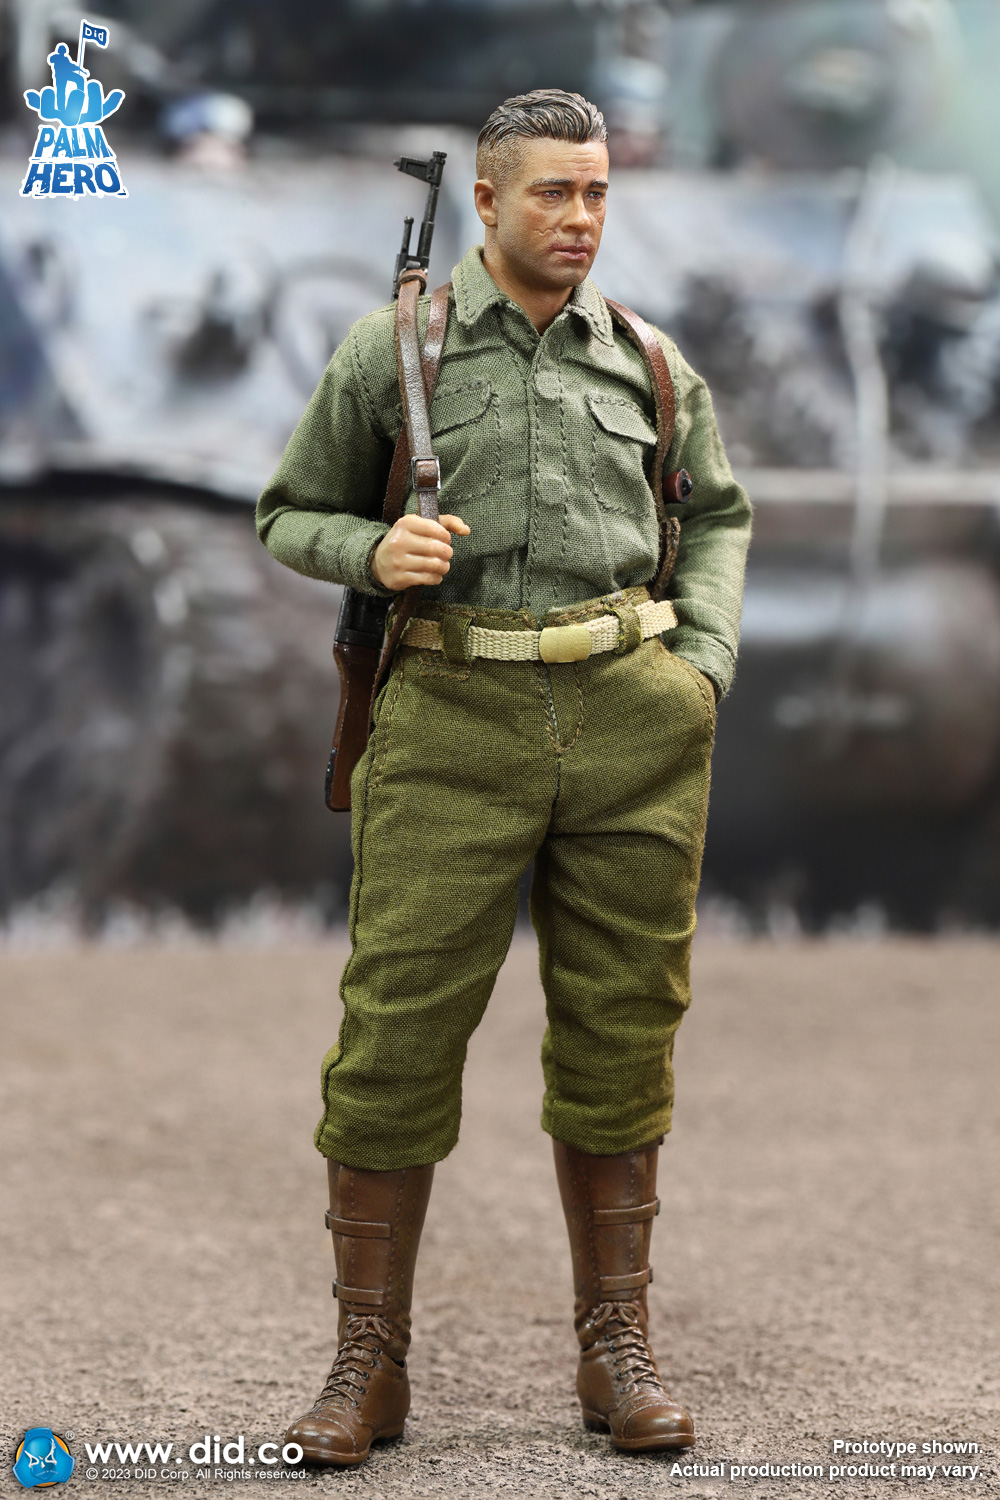 did - NEW PRODUCT: DID - 1/12 Pocket Hero Series Commander "Sherman" of the Second Armored Division of the US Army in World War II (#XA80019) 0616